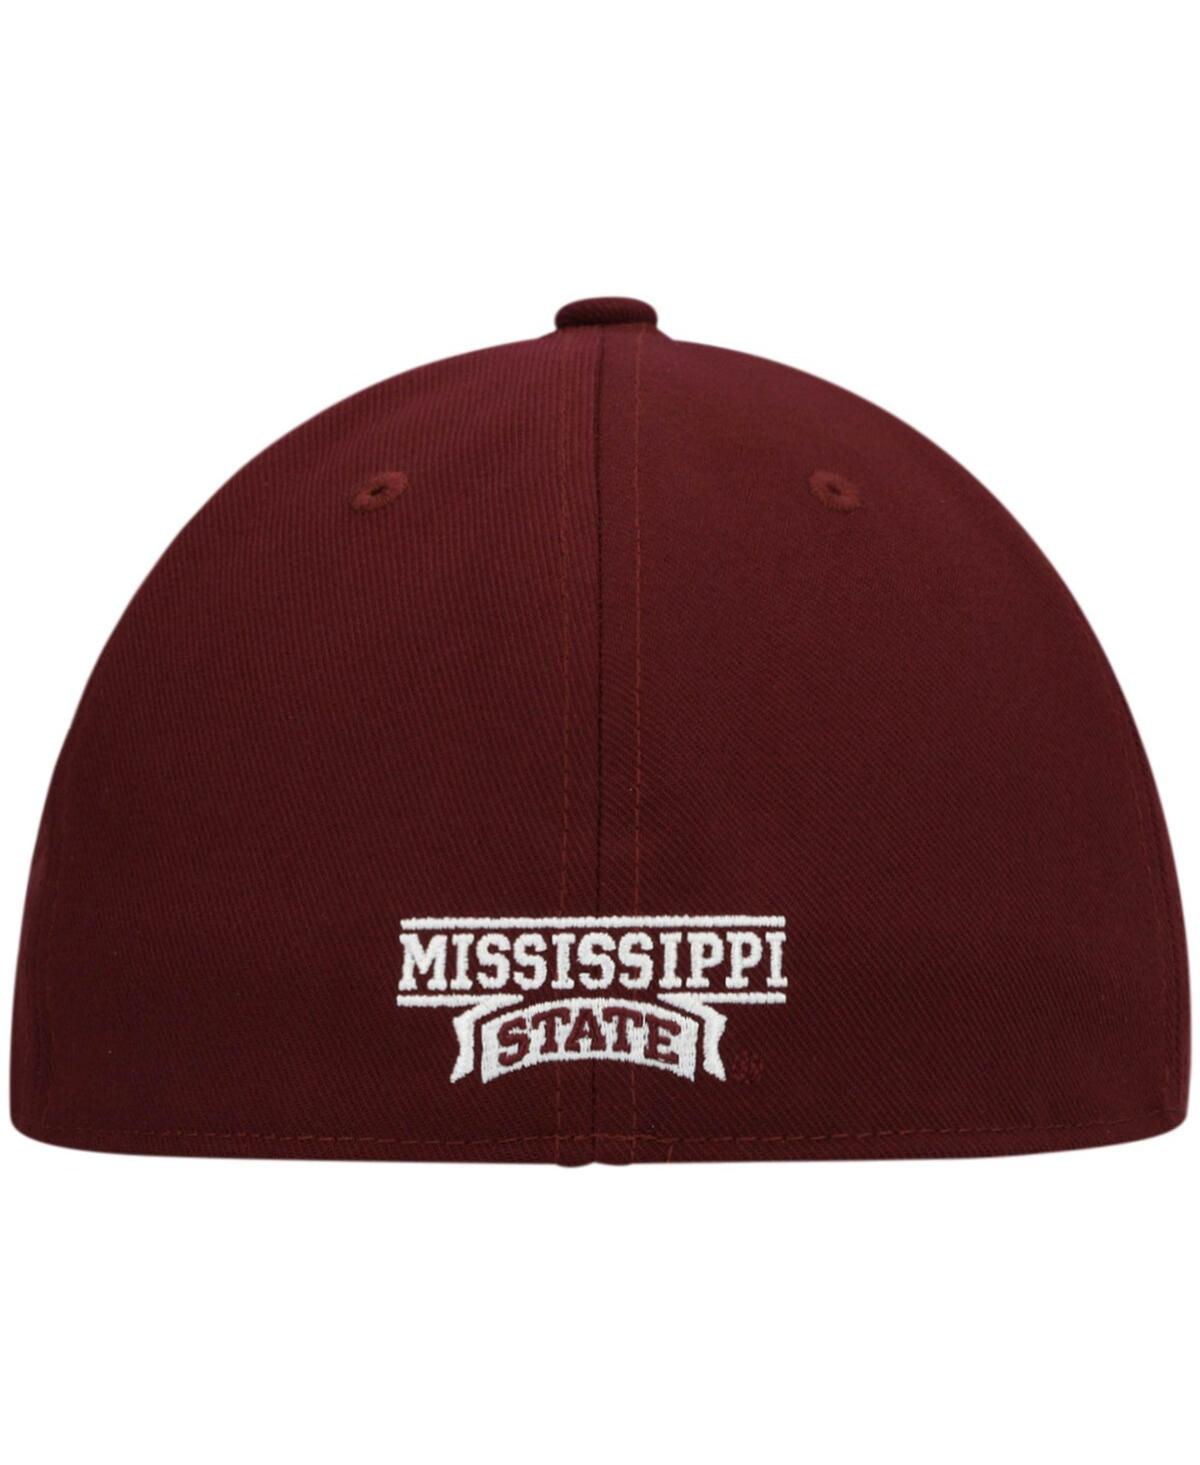 Shop Adidas Originals Men's Adidas Maroon Mississippi State Bulldogs Team On-field Baseball Fitted Hat